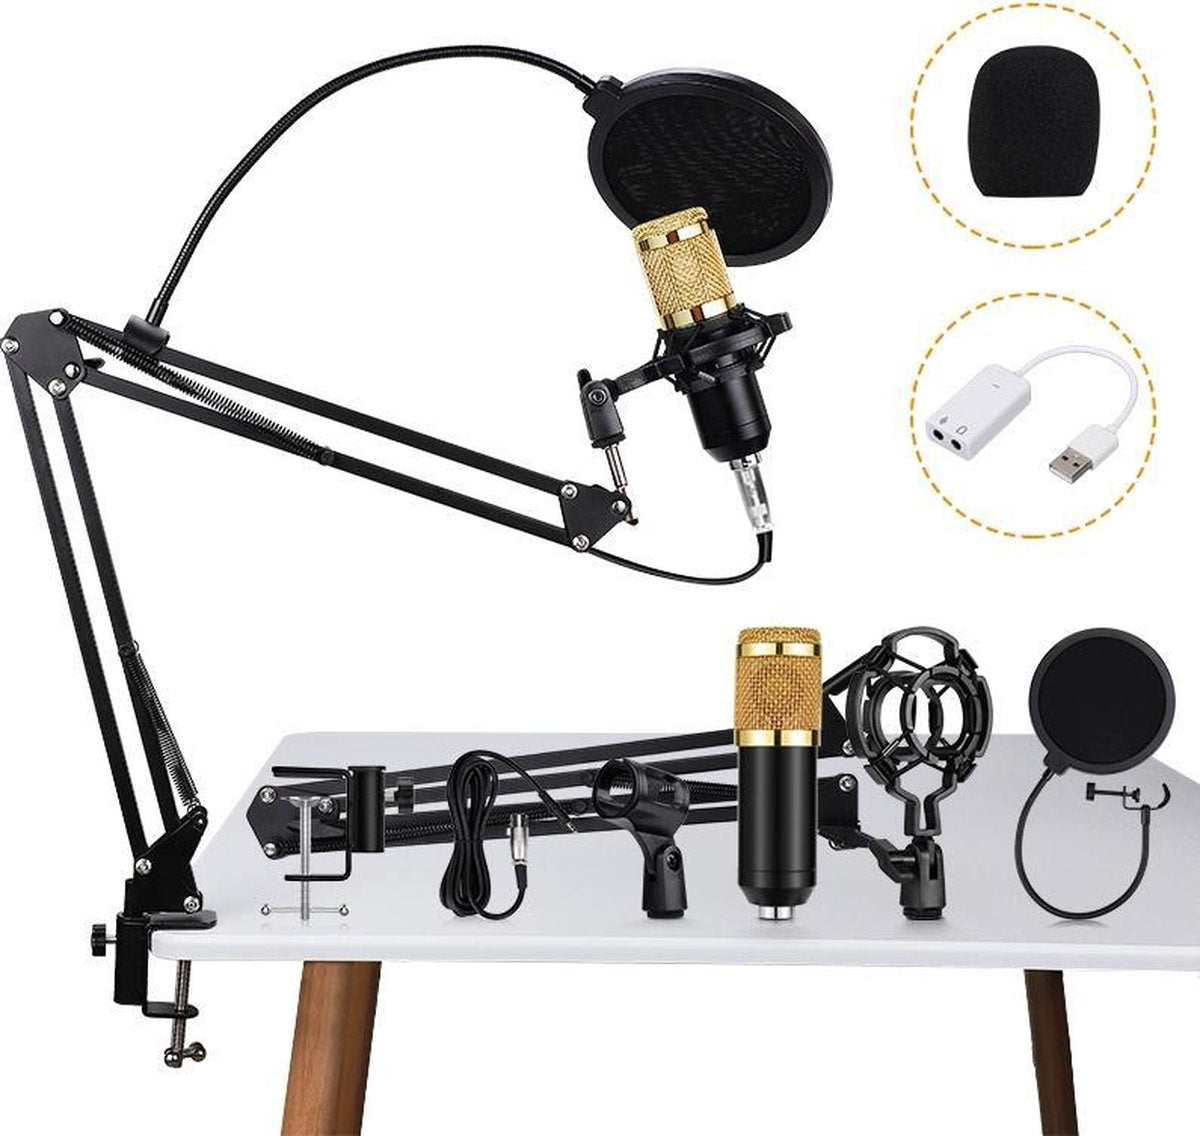 Travor Professional gaming microphone